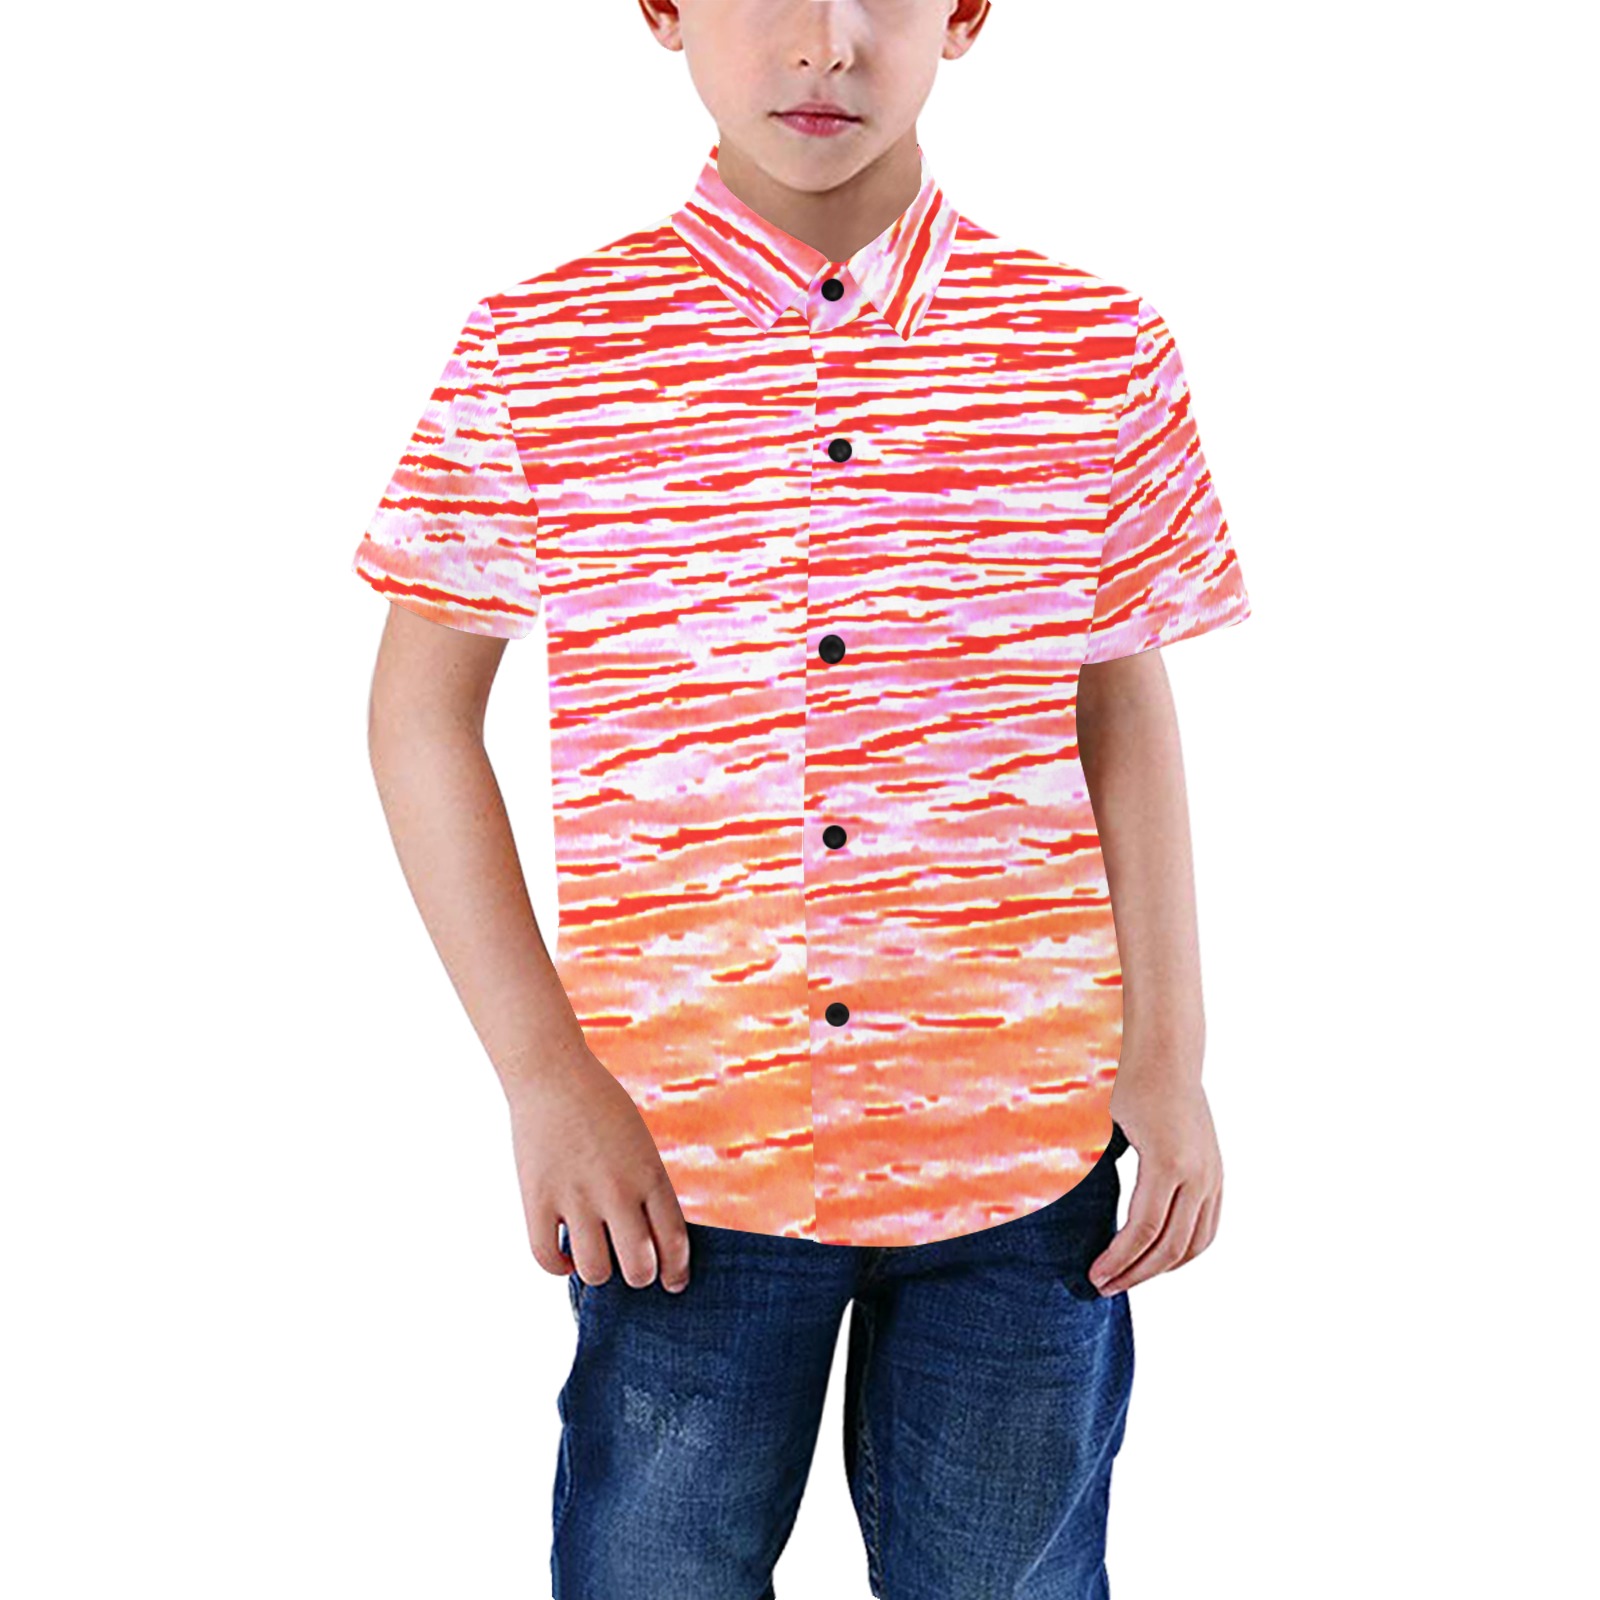 Orange and red water Boys' All Over Print Short Sleeve Shirt (Model T59)